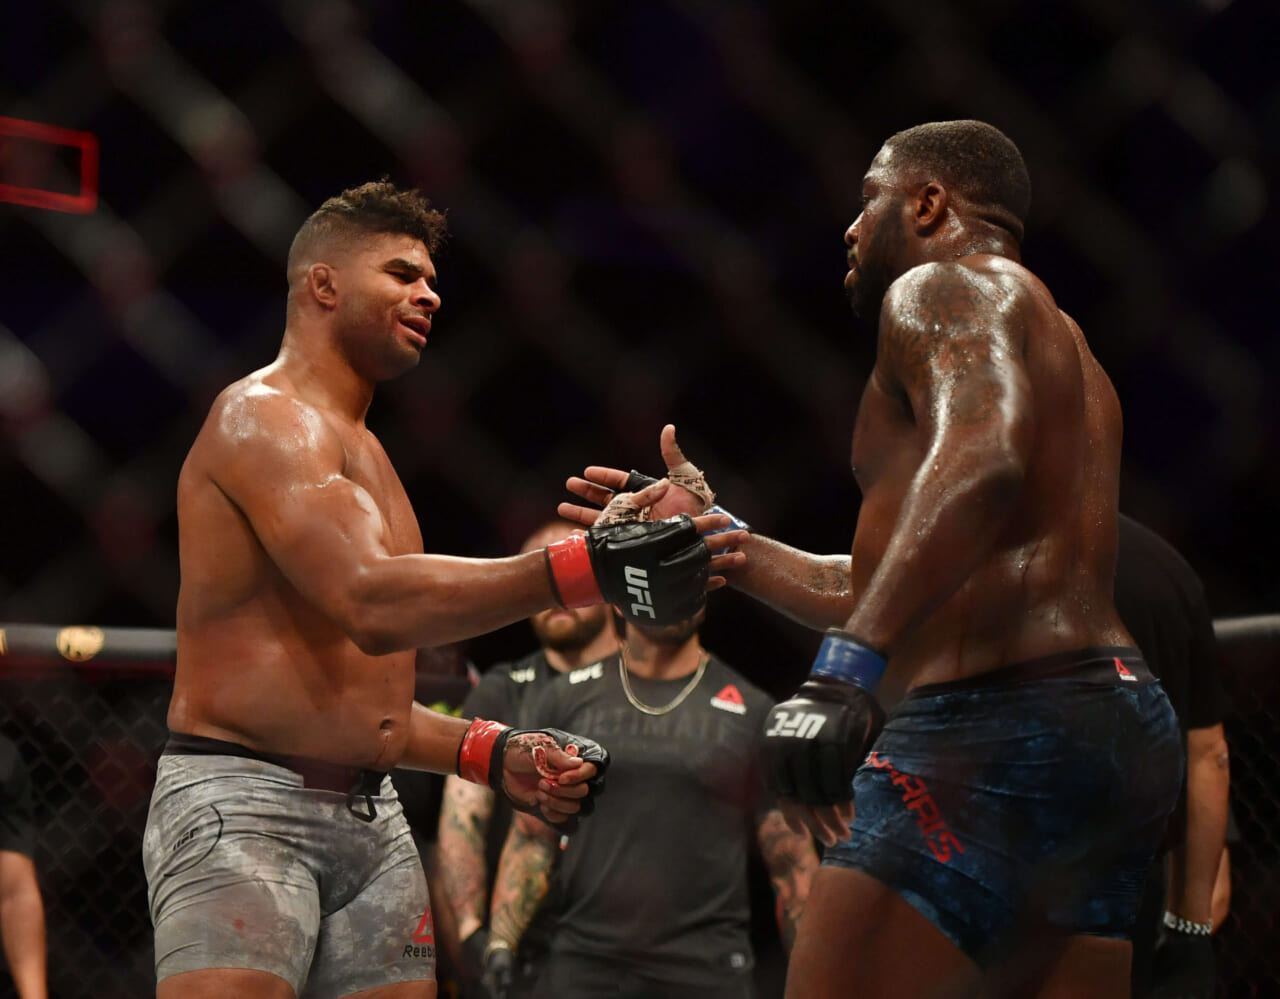 Alistair Overeem wants to capture UFC gold then immediately retire